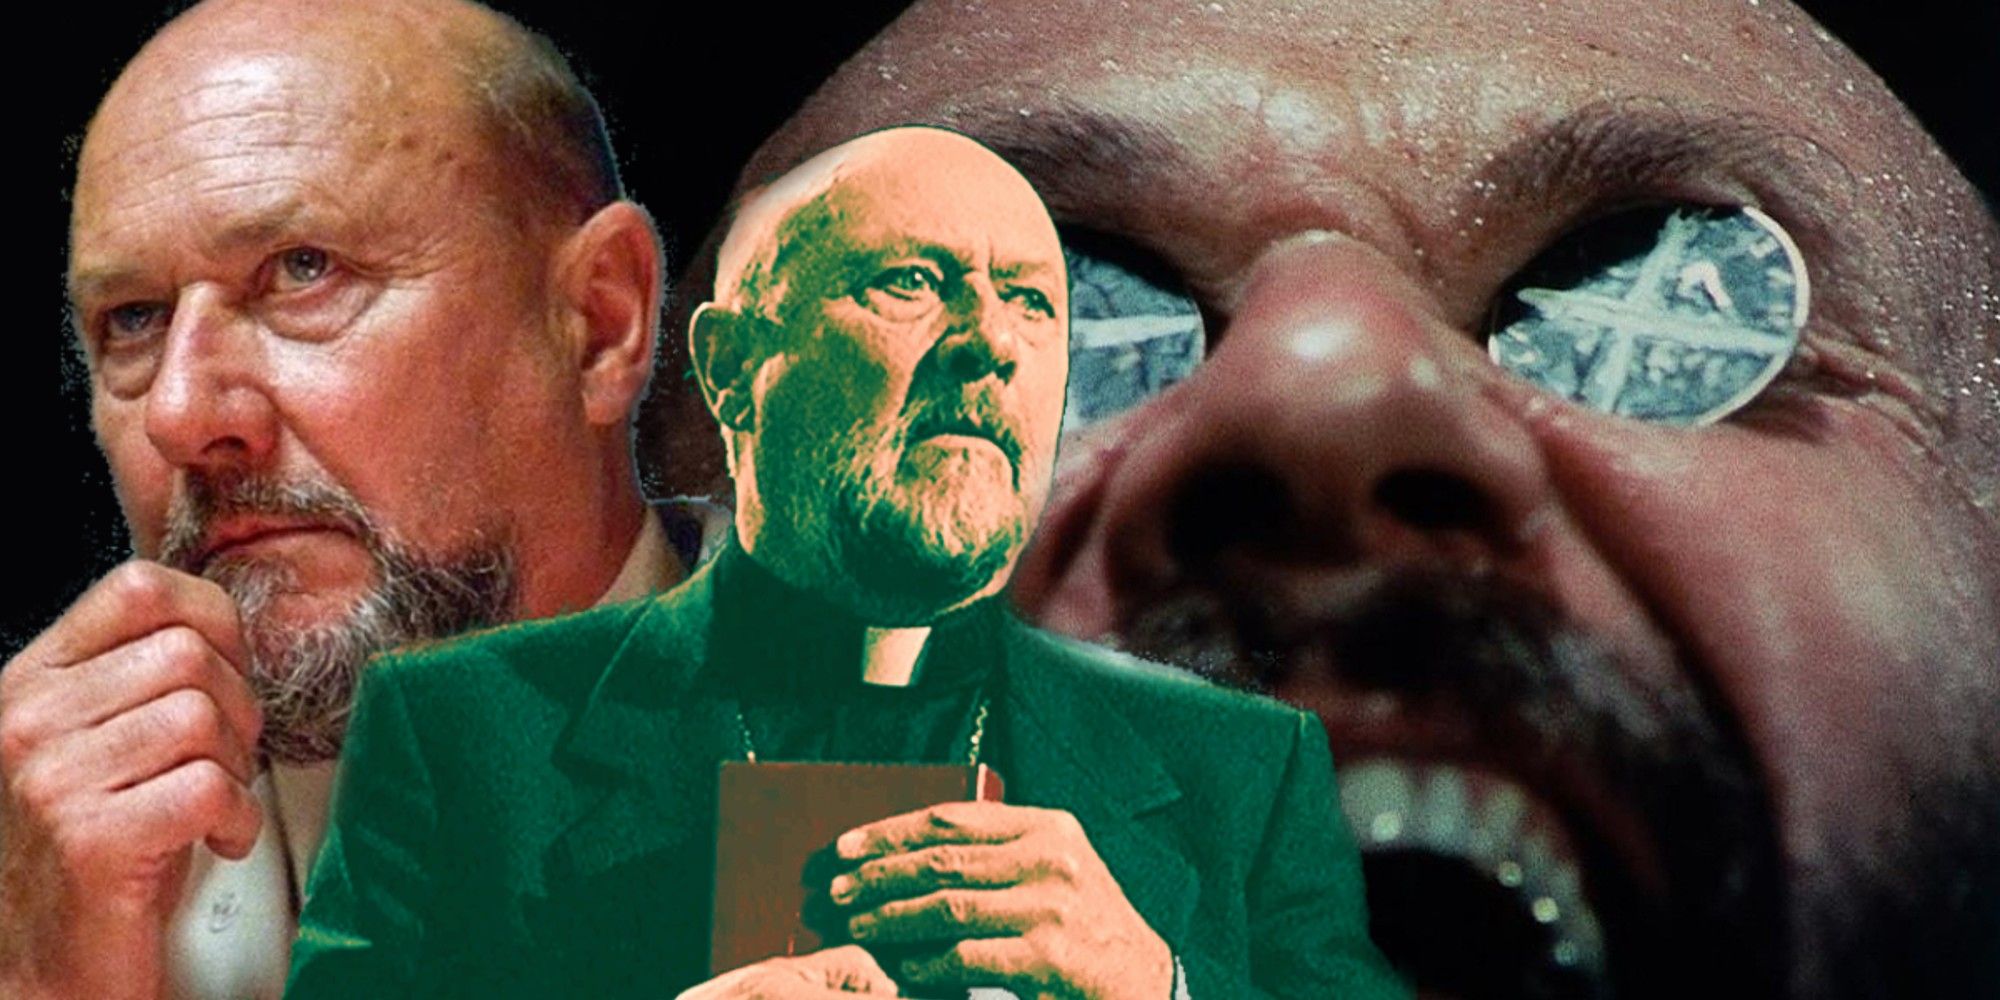 Blended image of Donald Pleasance in different horror movies